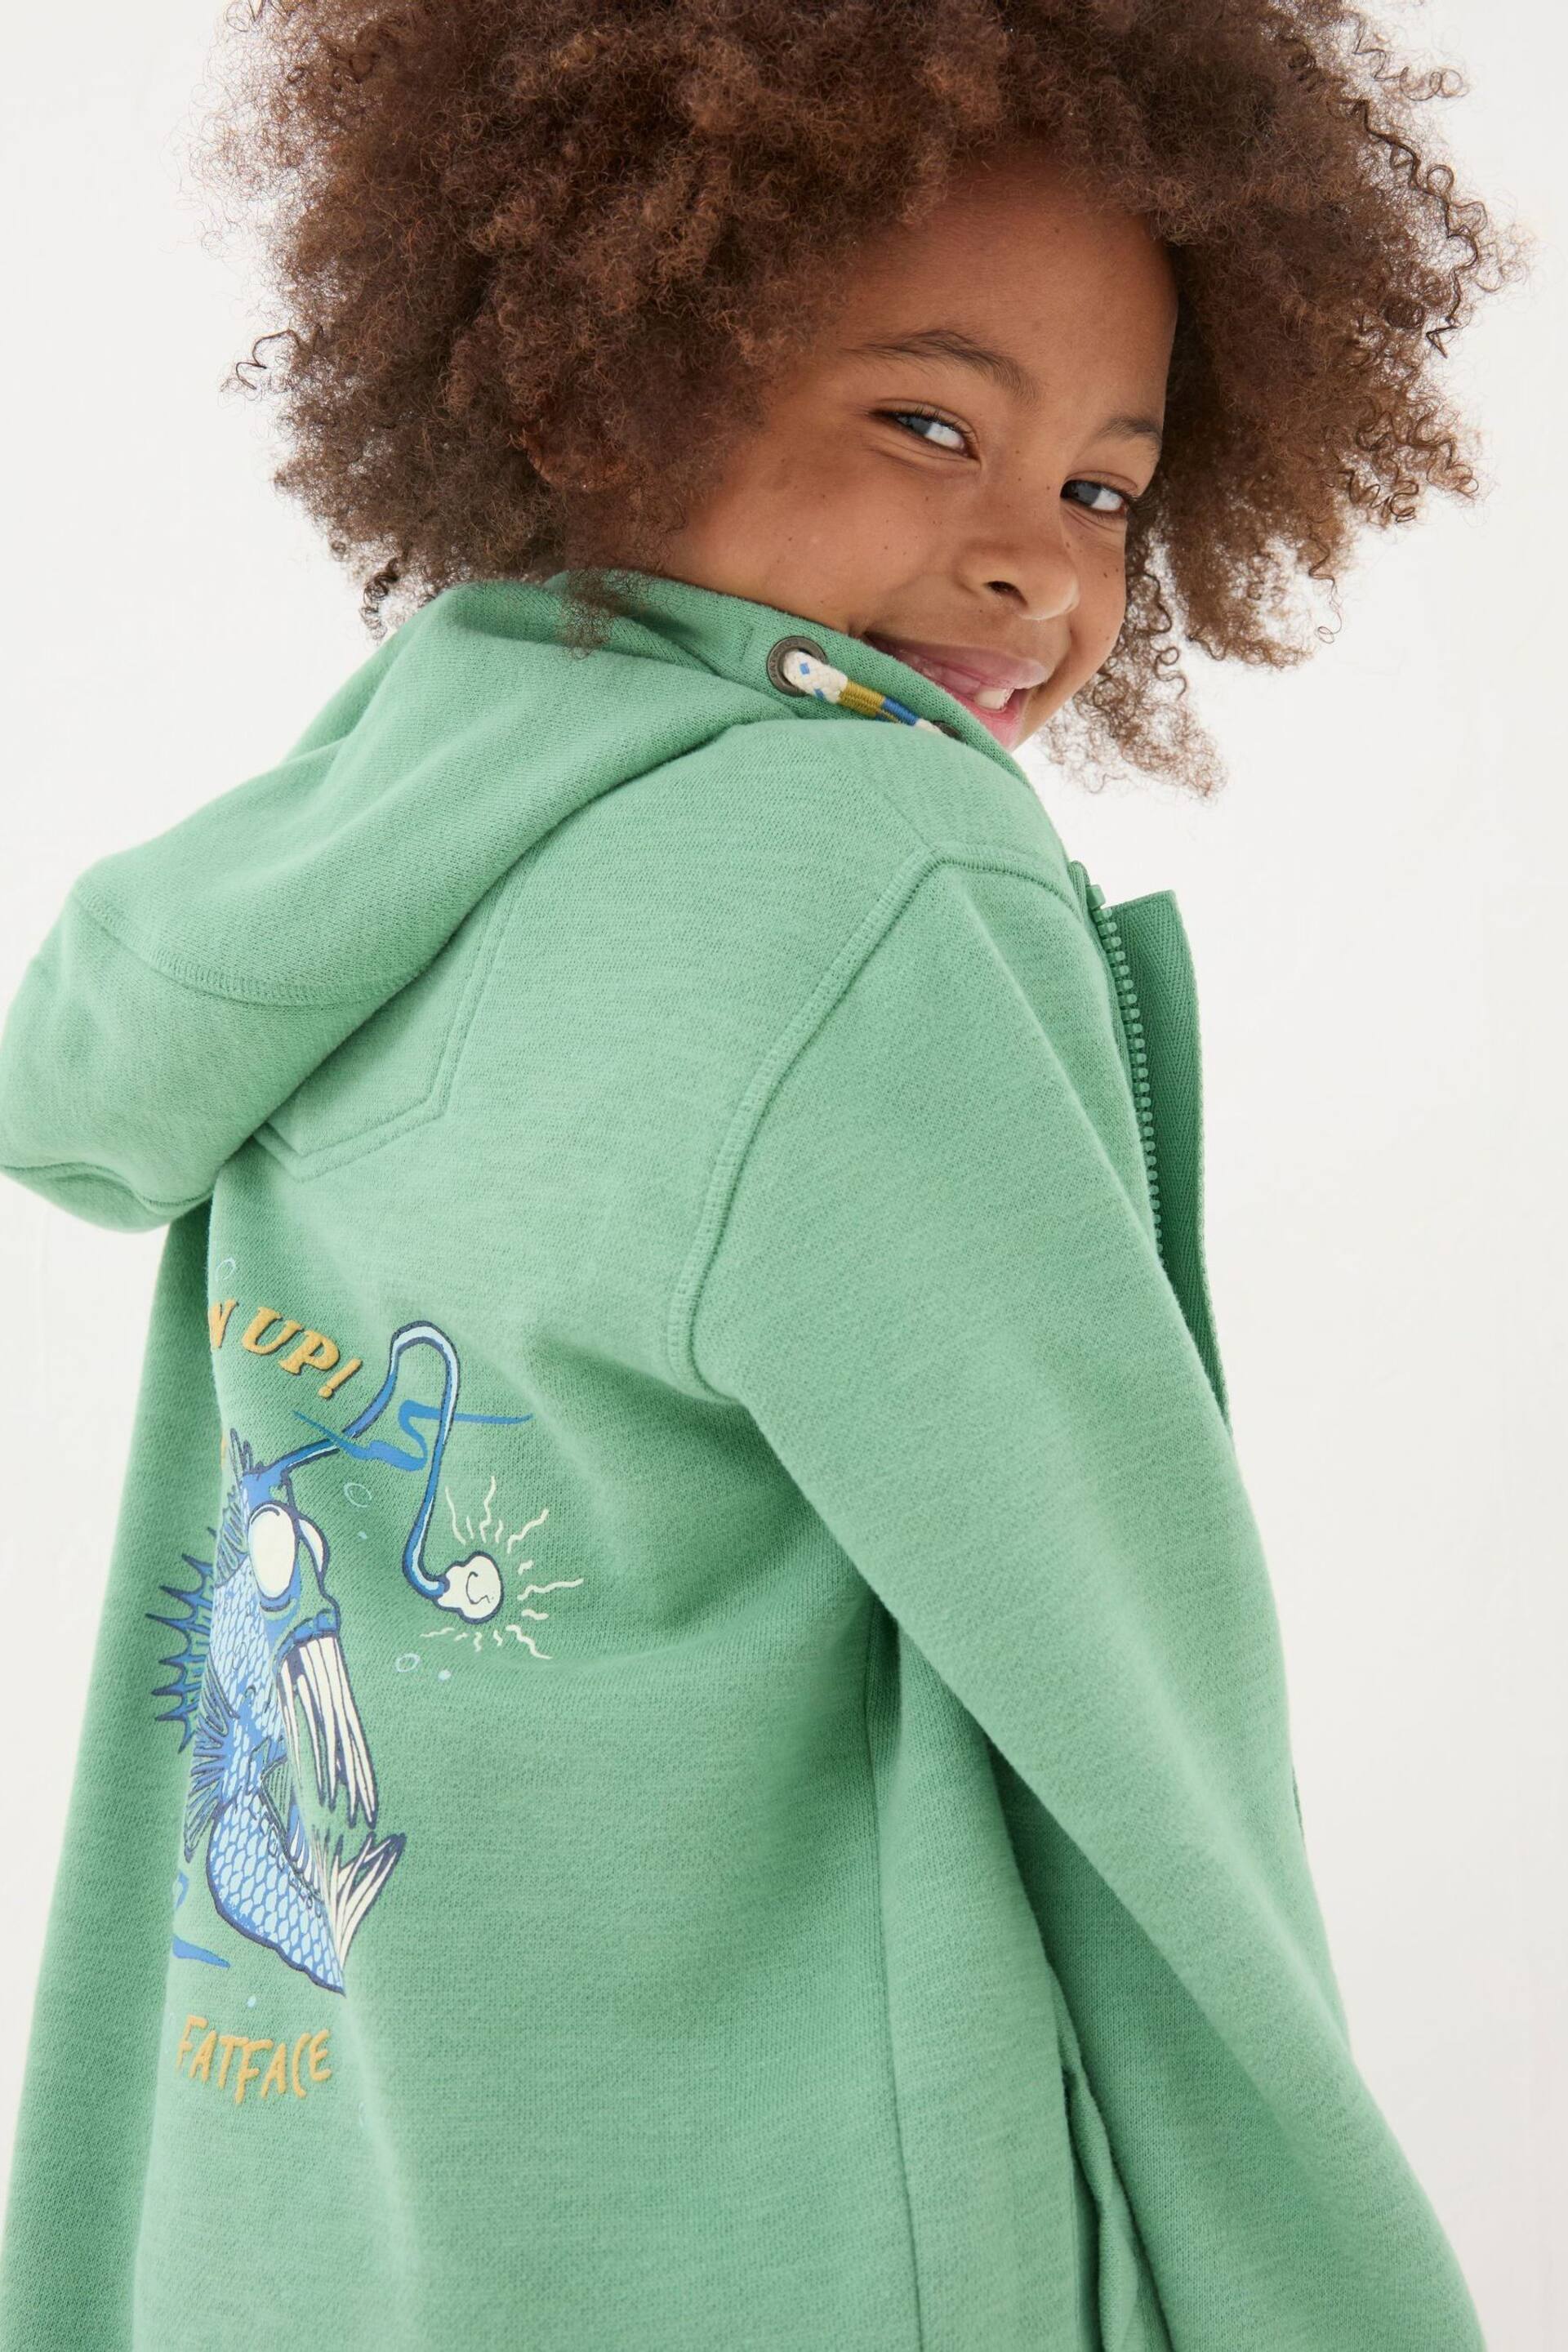 FatFace Green Creature Graphic Zip Through Hoodie - Image 4 of 5